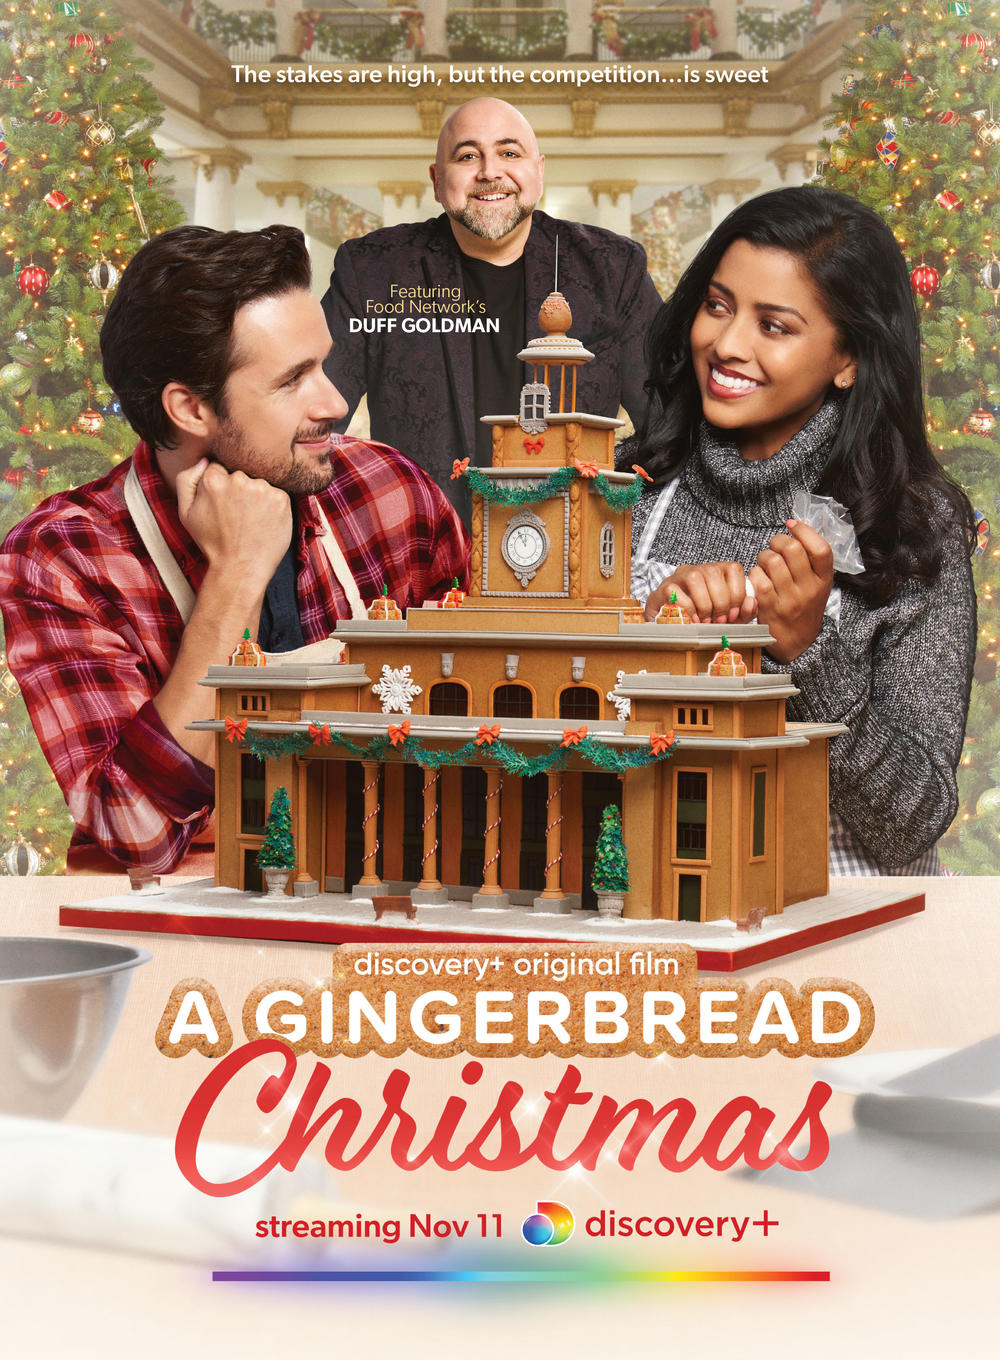 The promotional art for <em>A Gingerbread Christmas</em> on Discovery+, in which Tiya Sircar and Marc Bendavid are watched over by the Ace of Cakes himself, Duff Goldman.